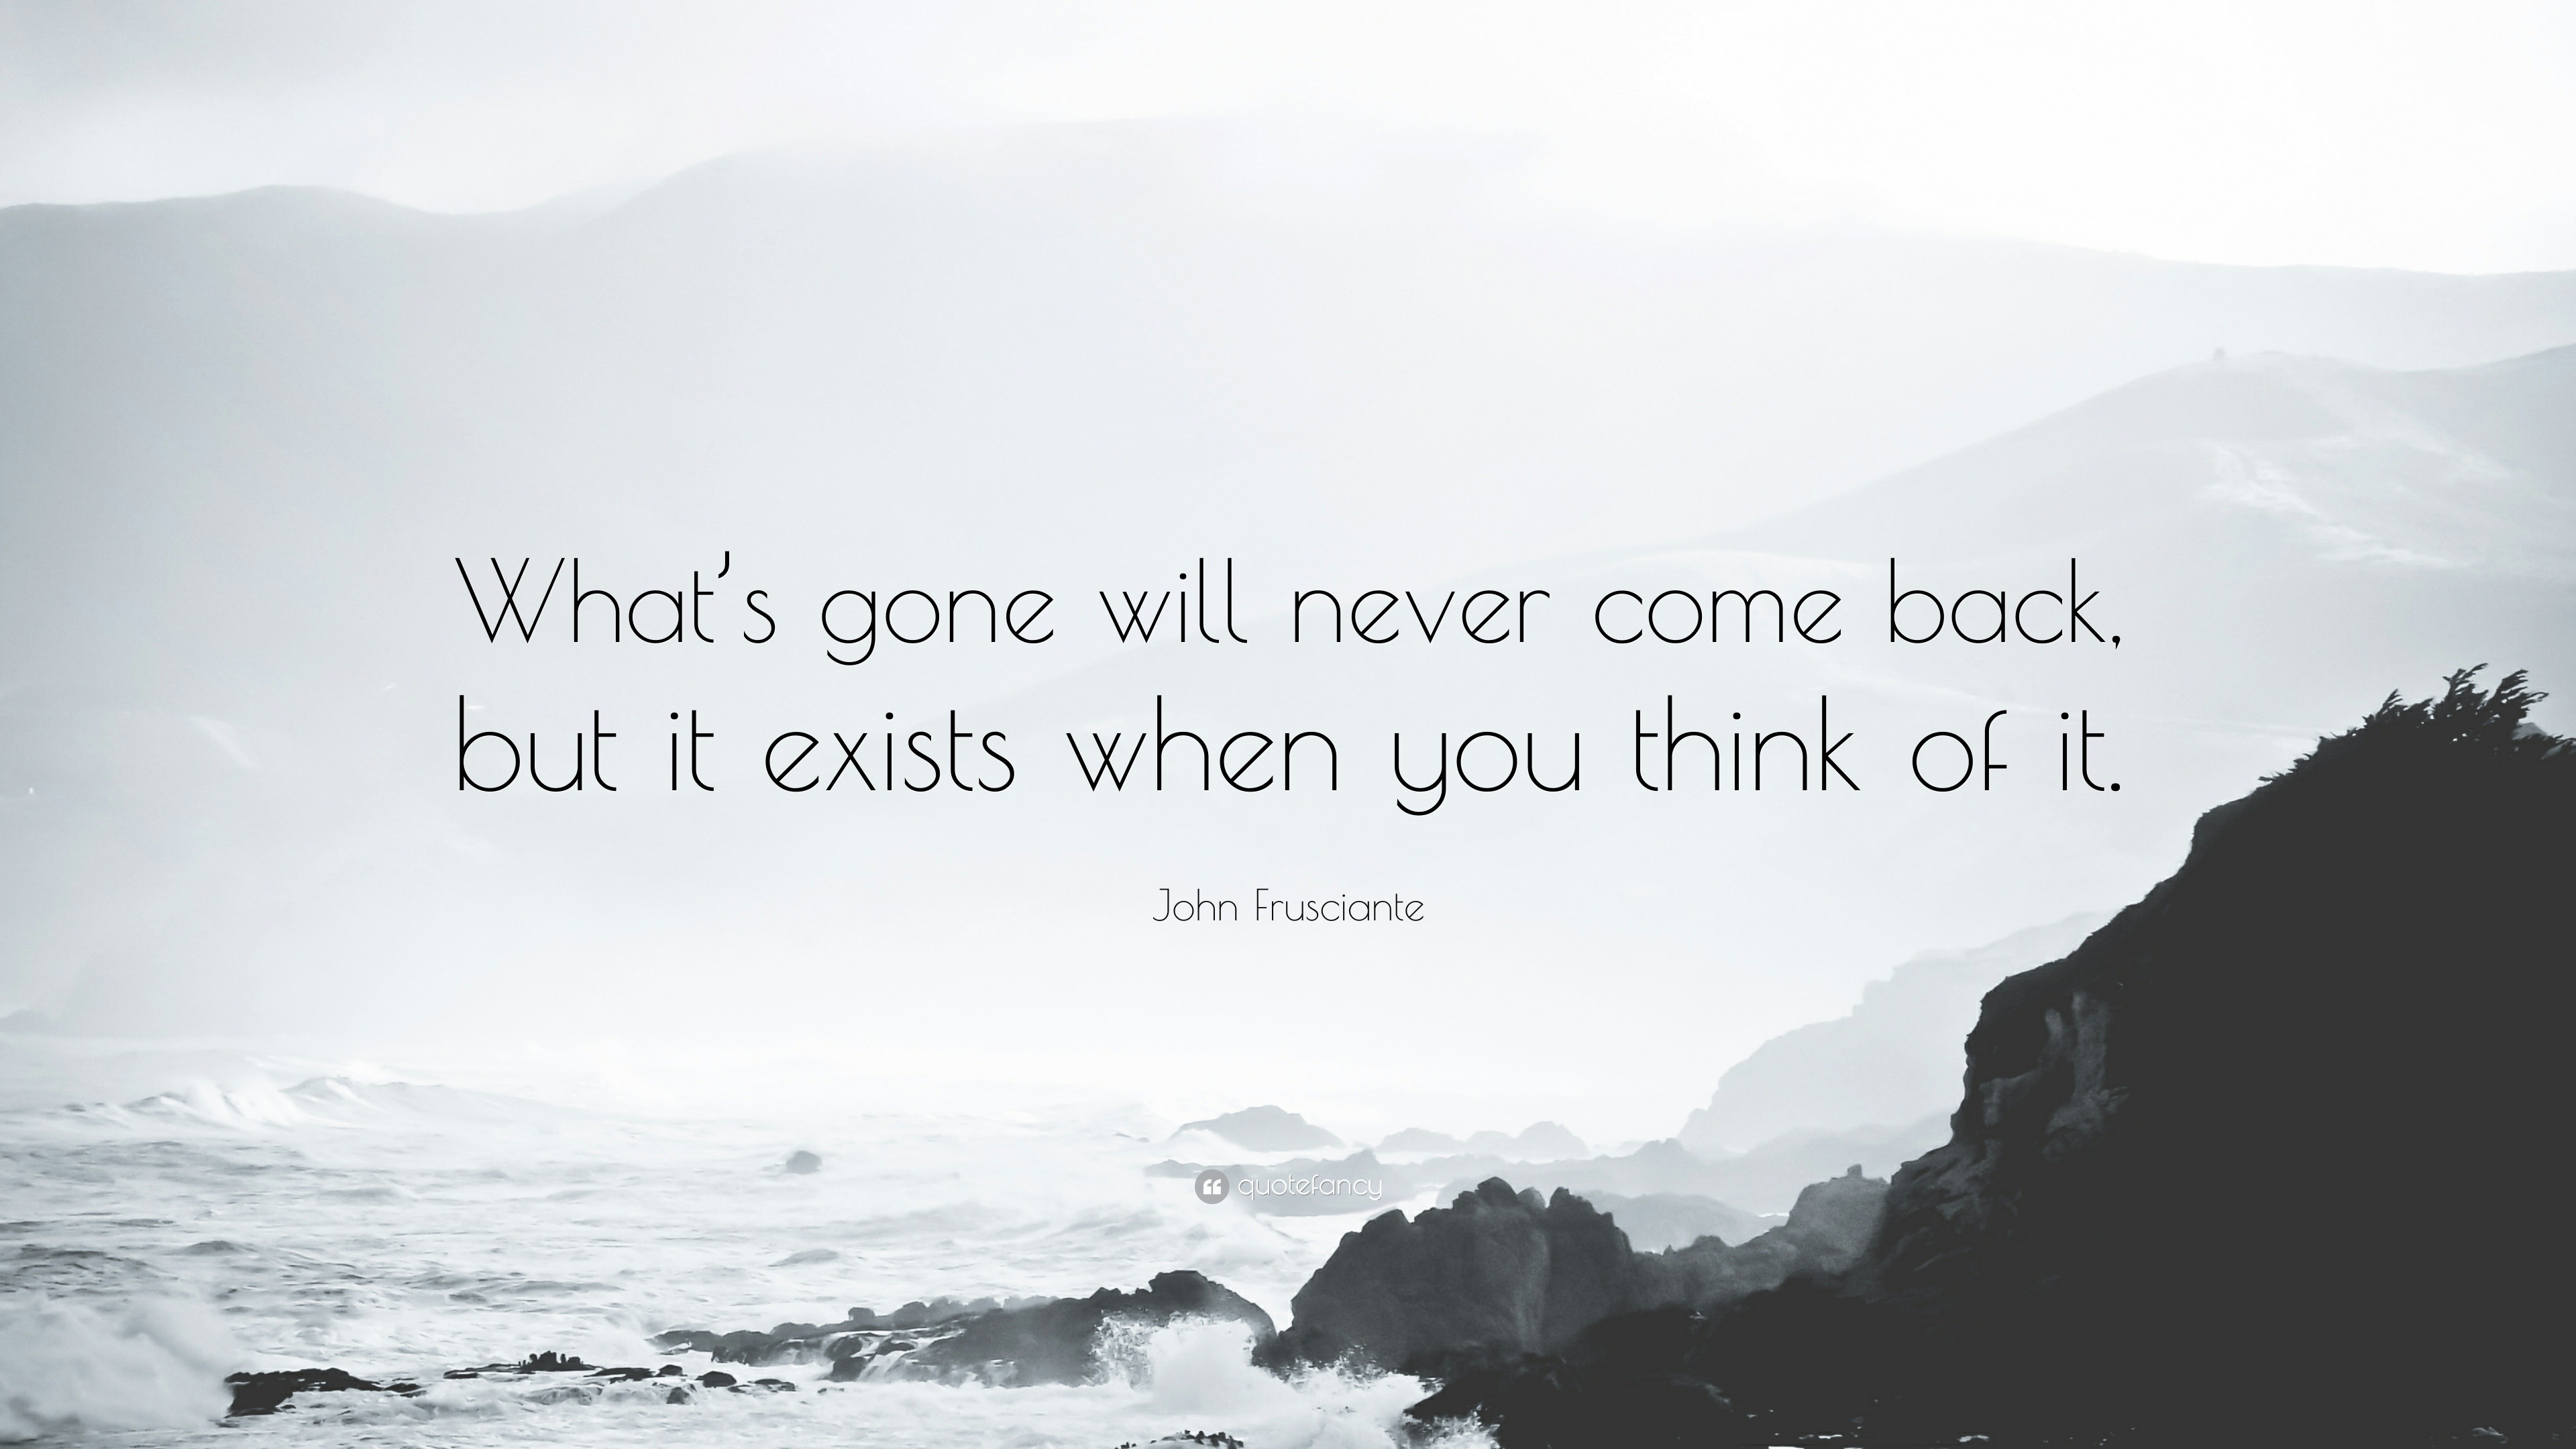 John Frusciante Quote: “What's gone will never come back, but it exists  when you think of